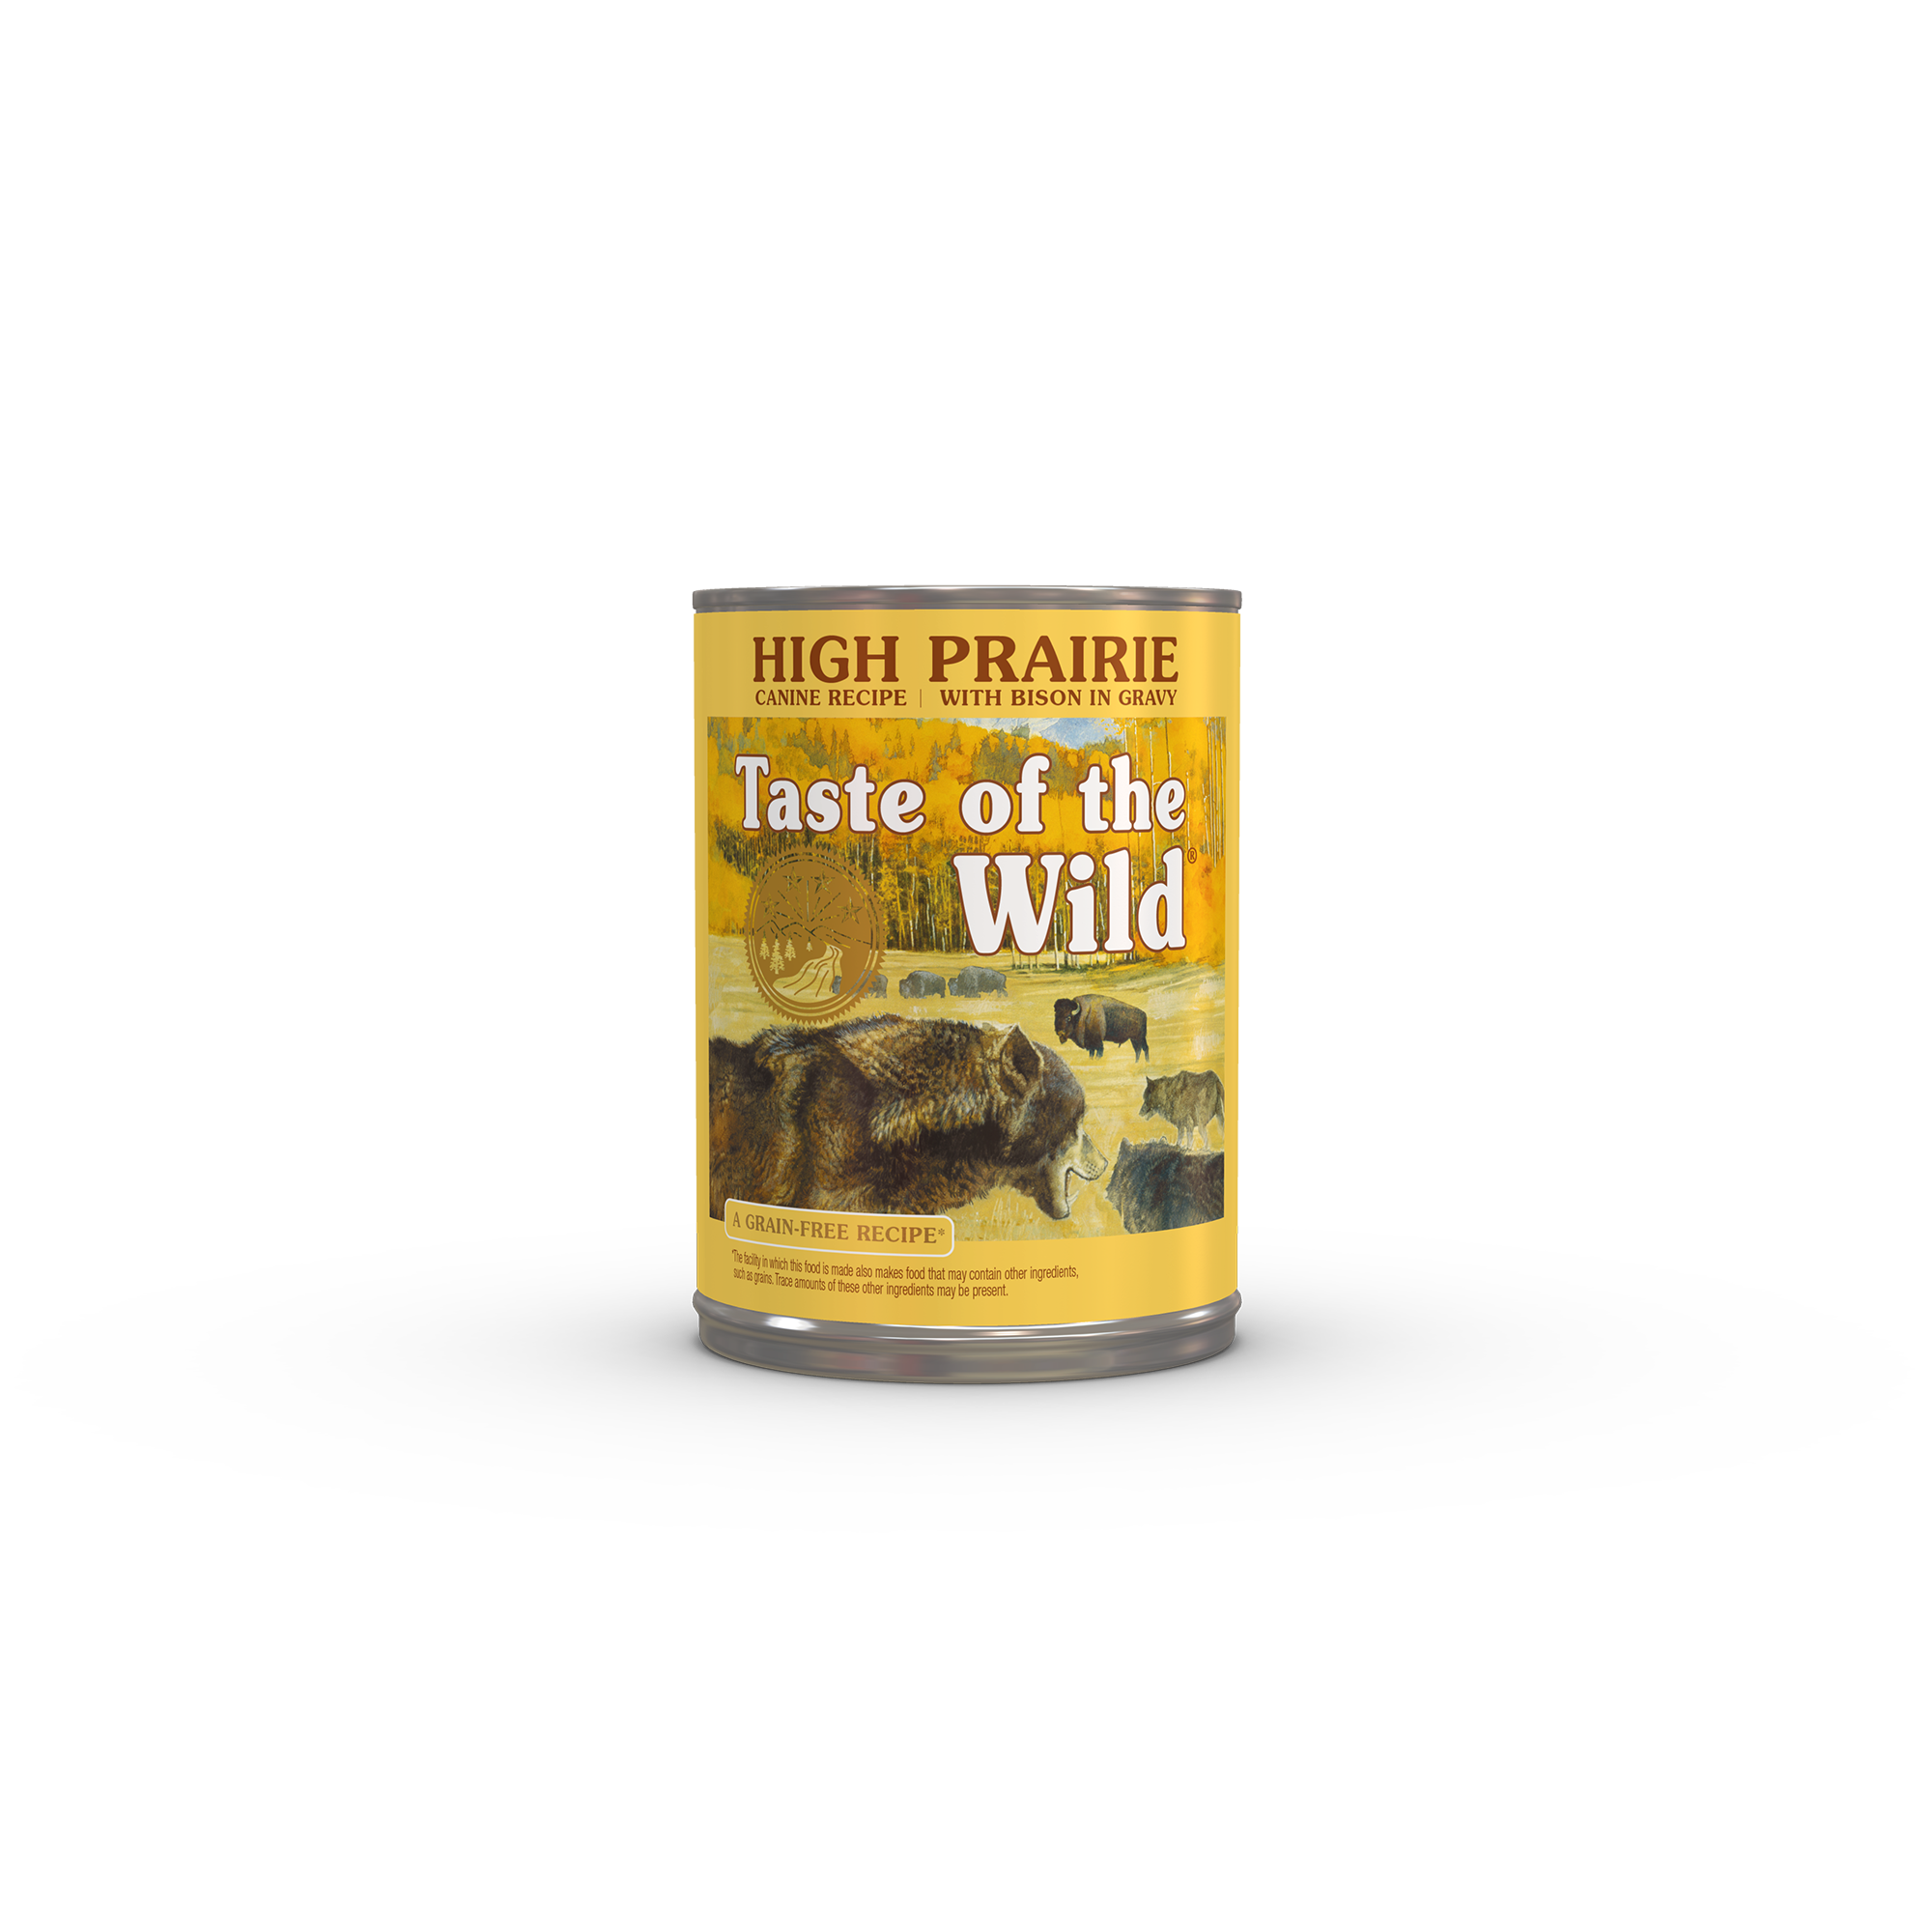 Taste of the Wild Grain-Free Canned High Prairie Canine Recipe with Bison in Gravy package